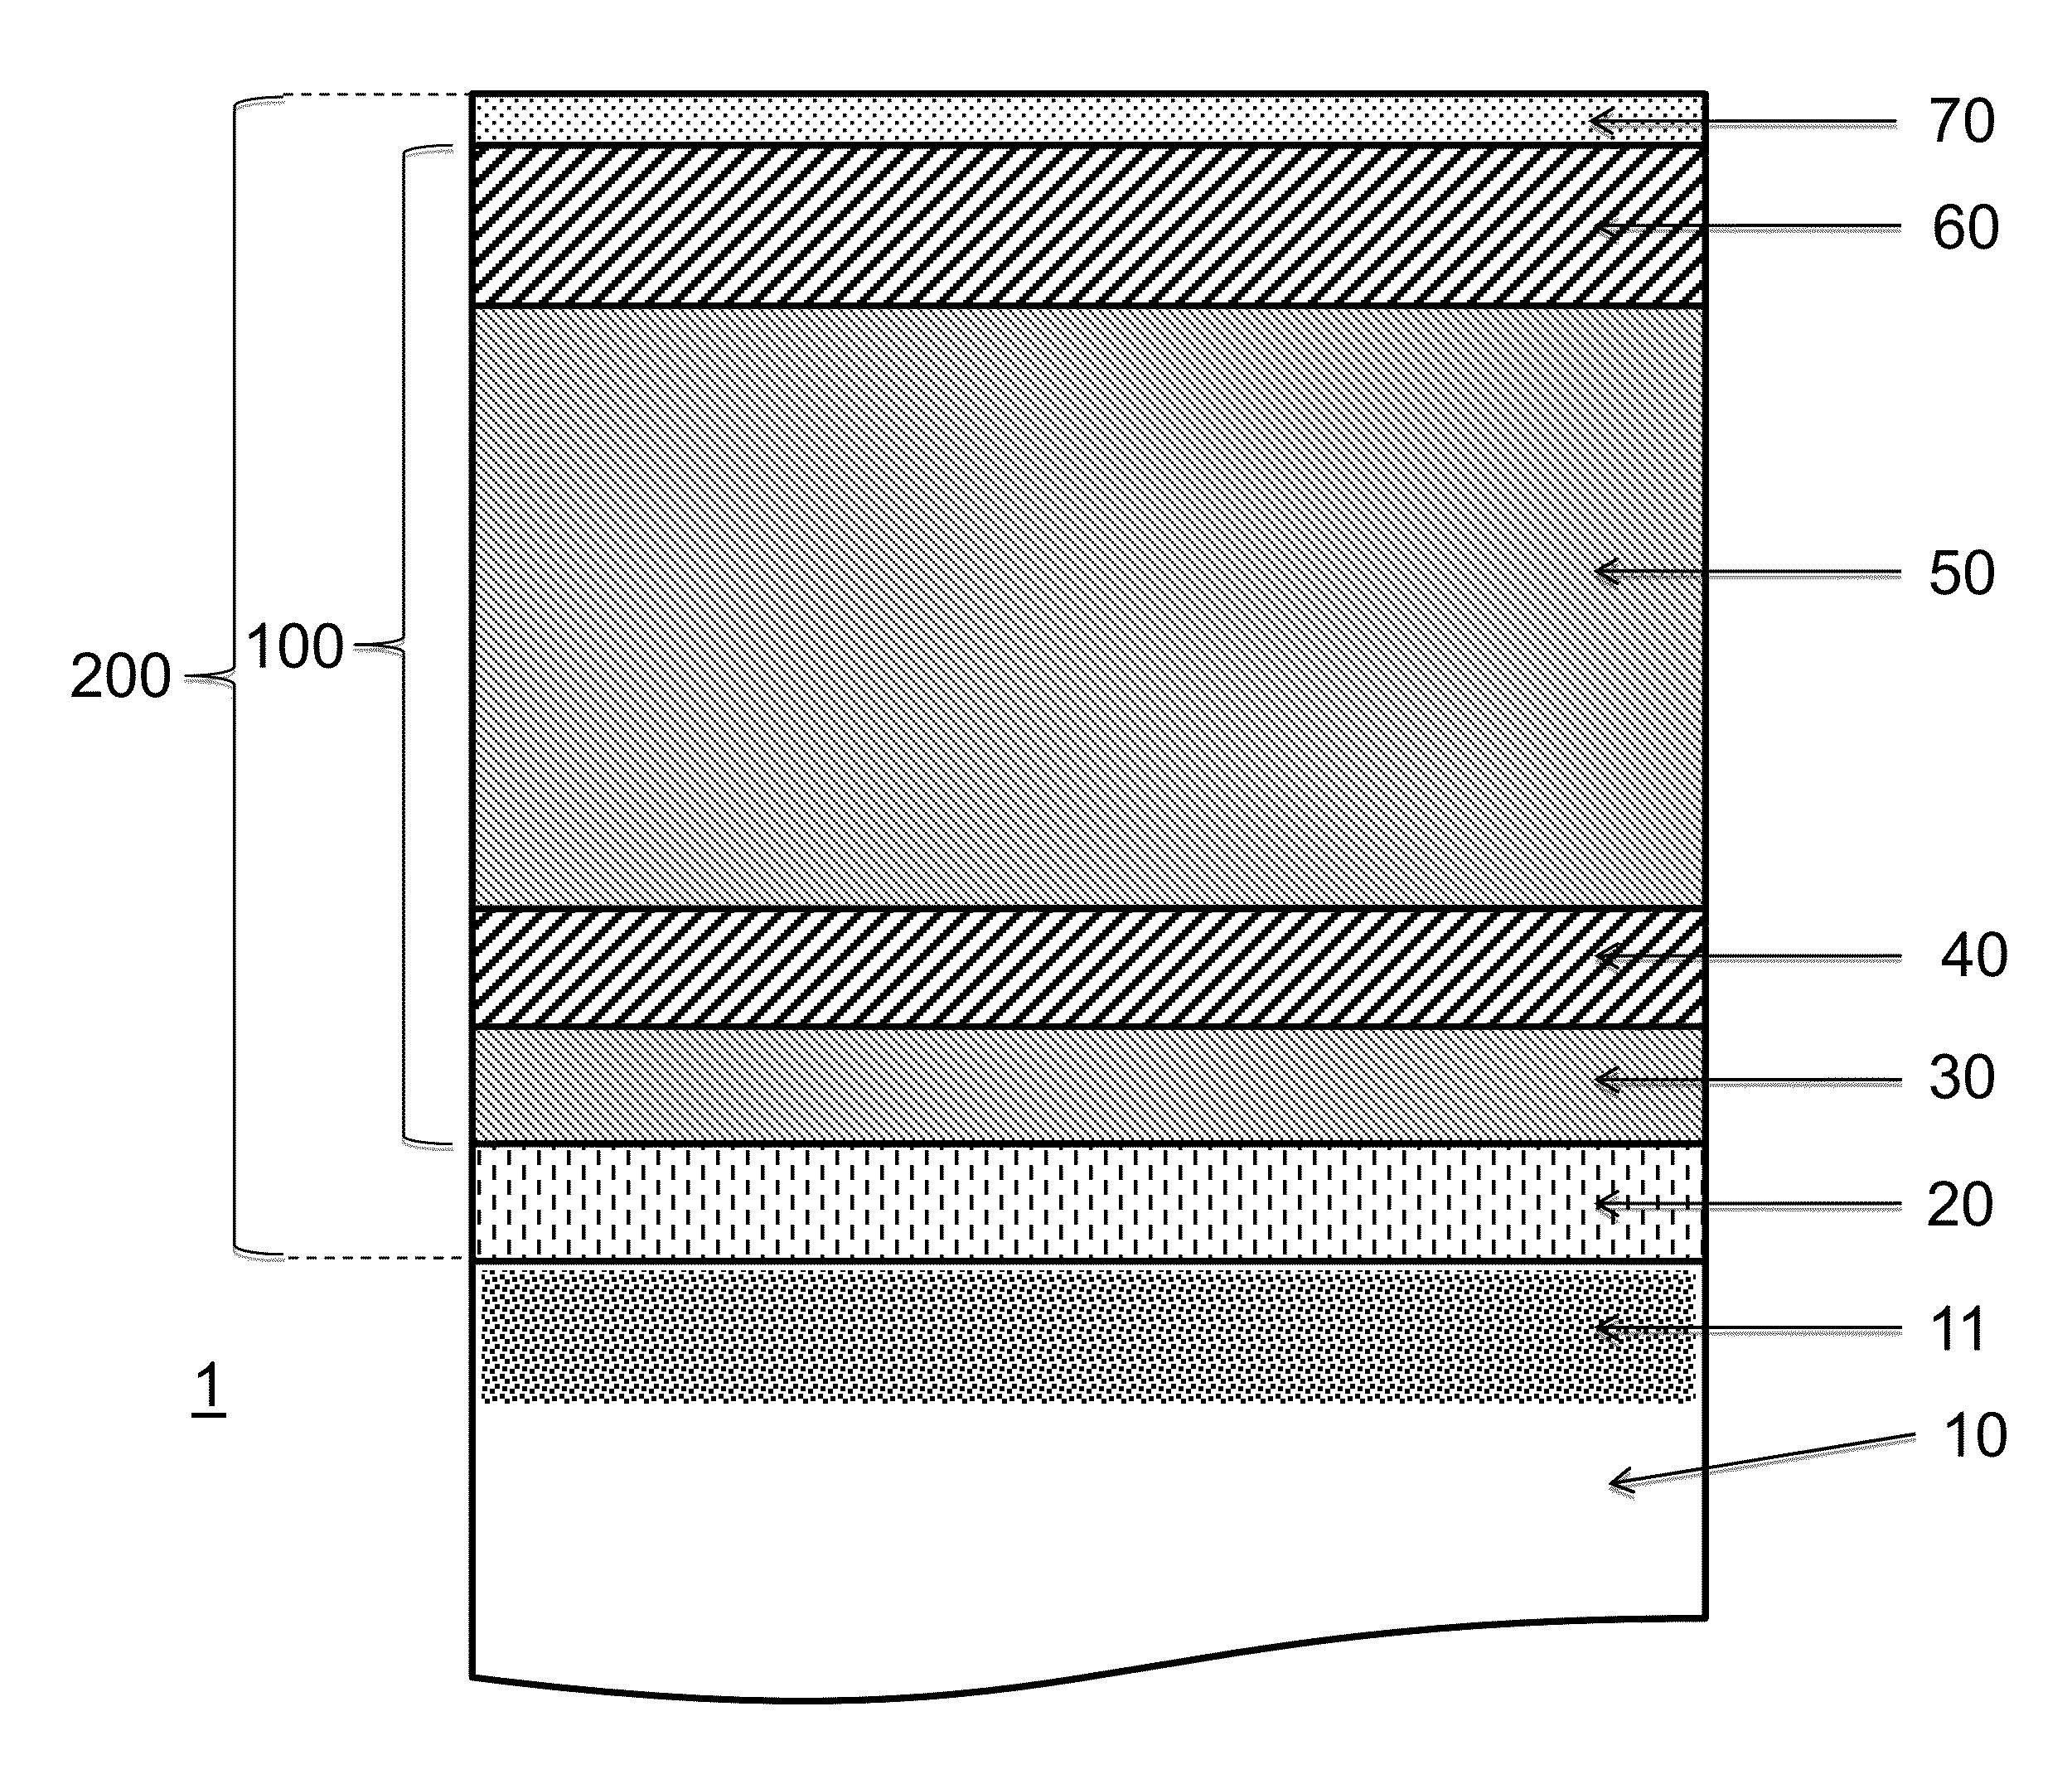 Scratch-resistant chemically tempered glass substrate and use thereof